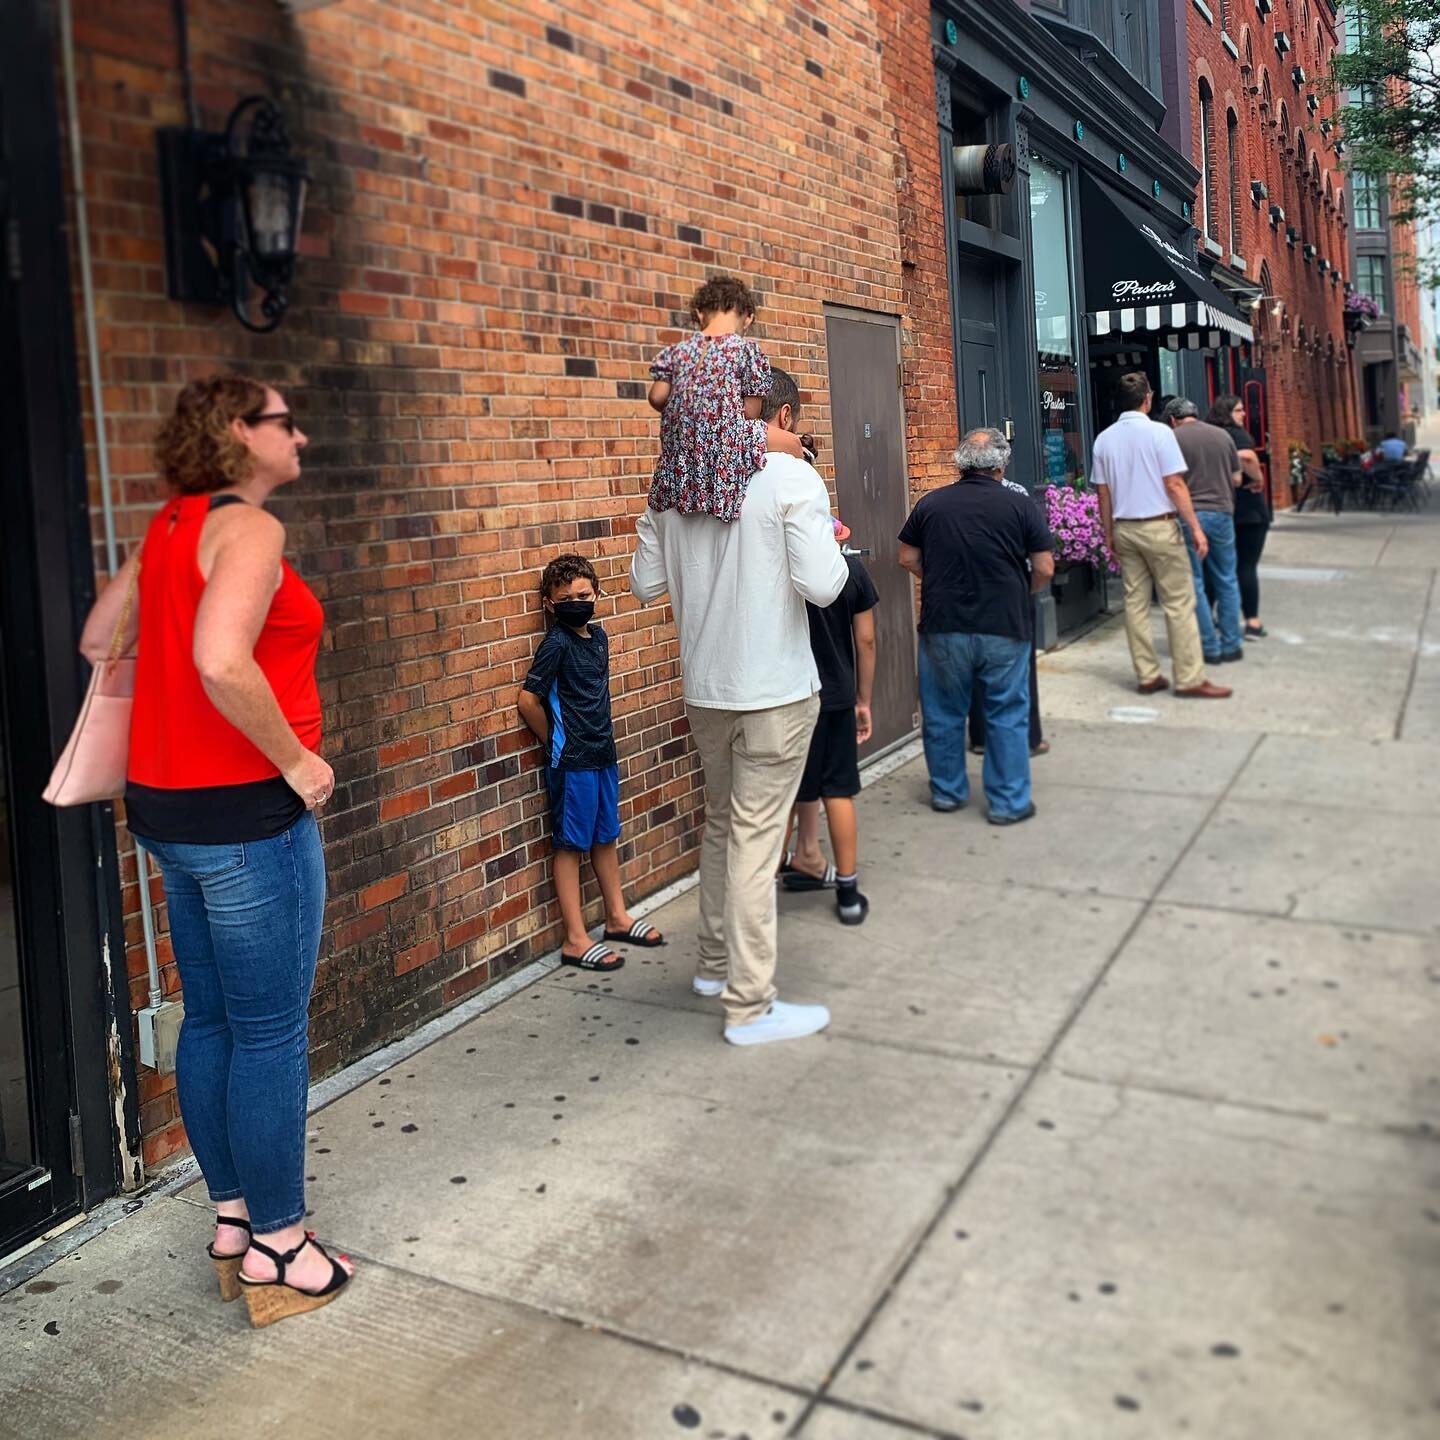 lunch time @ pasta&rsquo;s daily bread 🥖 
.
.
line moves quickly, we promise ;) 
.
.
thanks for the love 💗 
.
.
#freshbakedbread #pastabilities #sandwich #yum #syracuse #cookies #lineforbusiness #thankyou